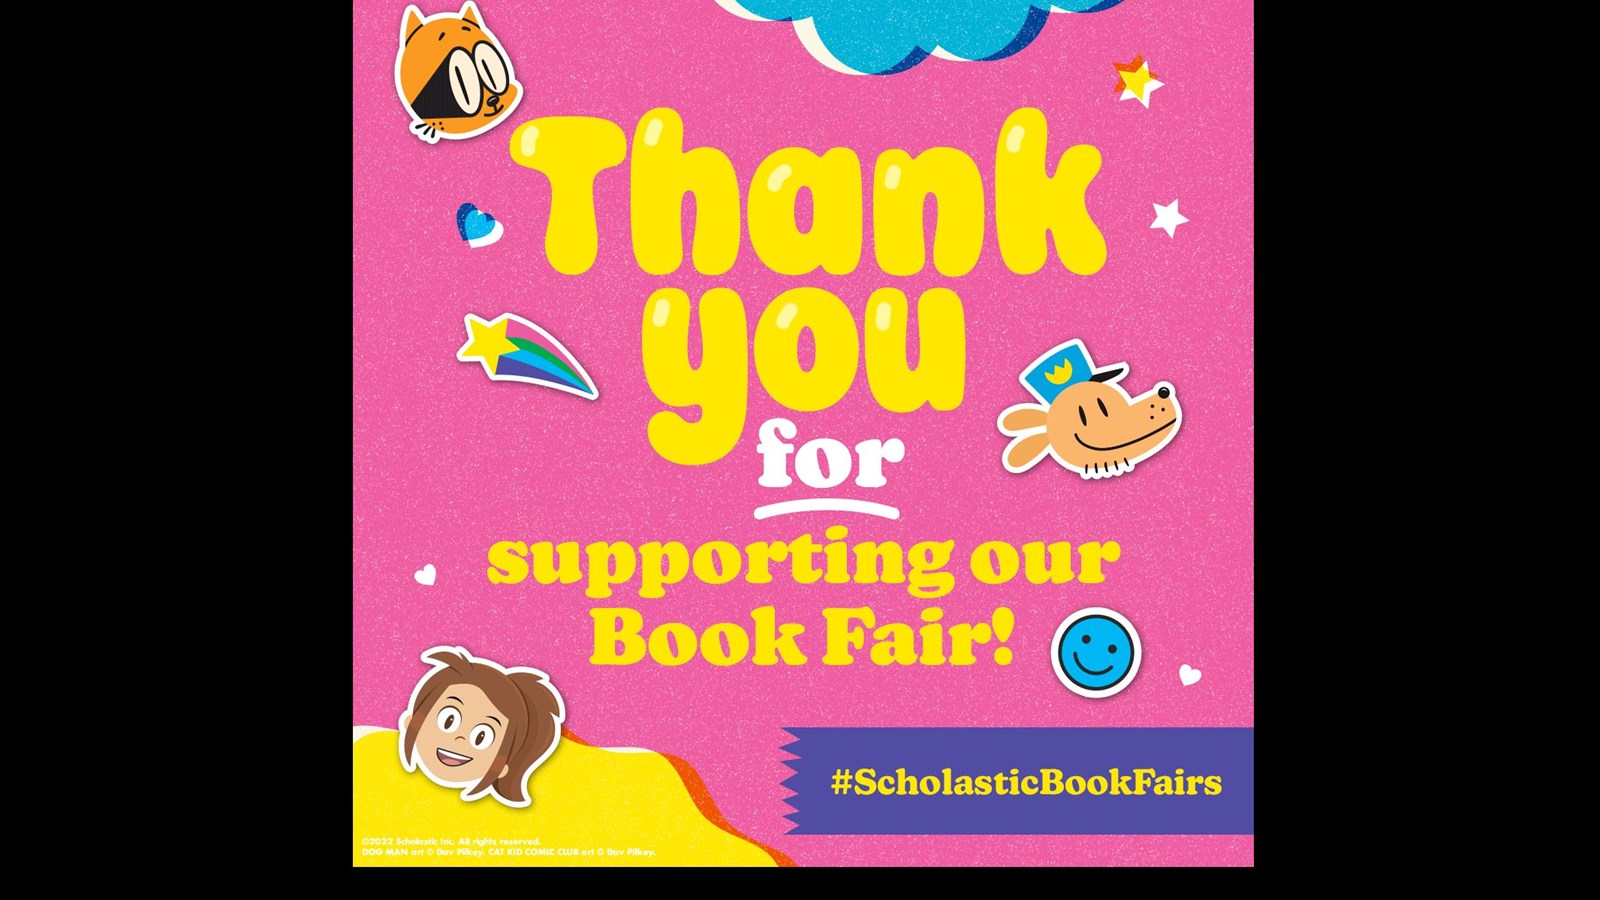 "Thank you for supporting our Book Fair!" written in yellow on a pink background with icons of dogman and a girl